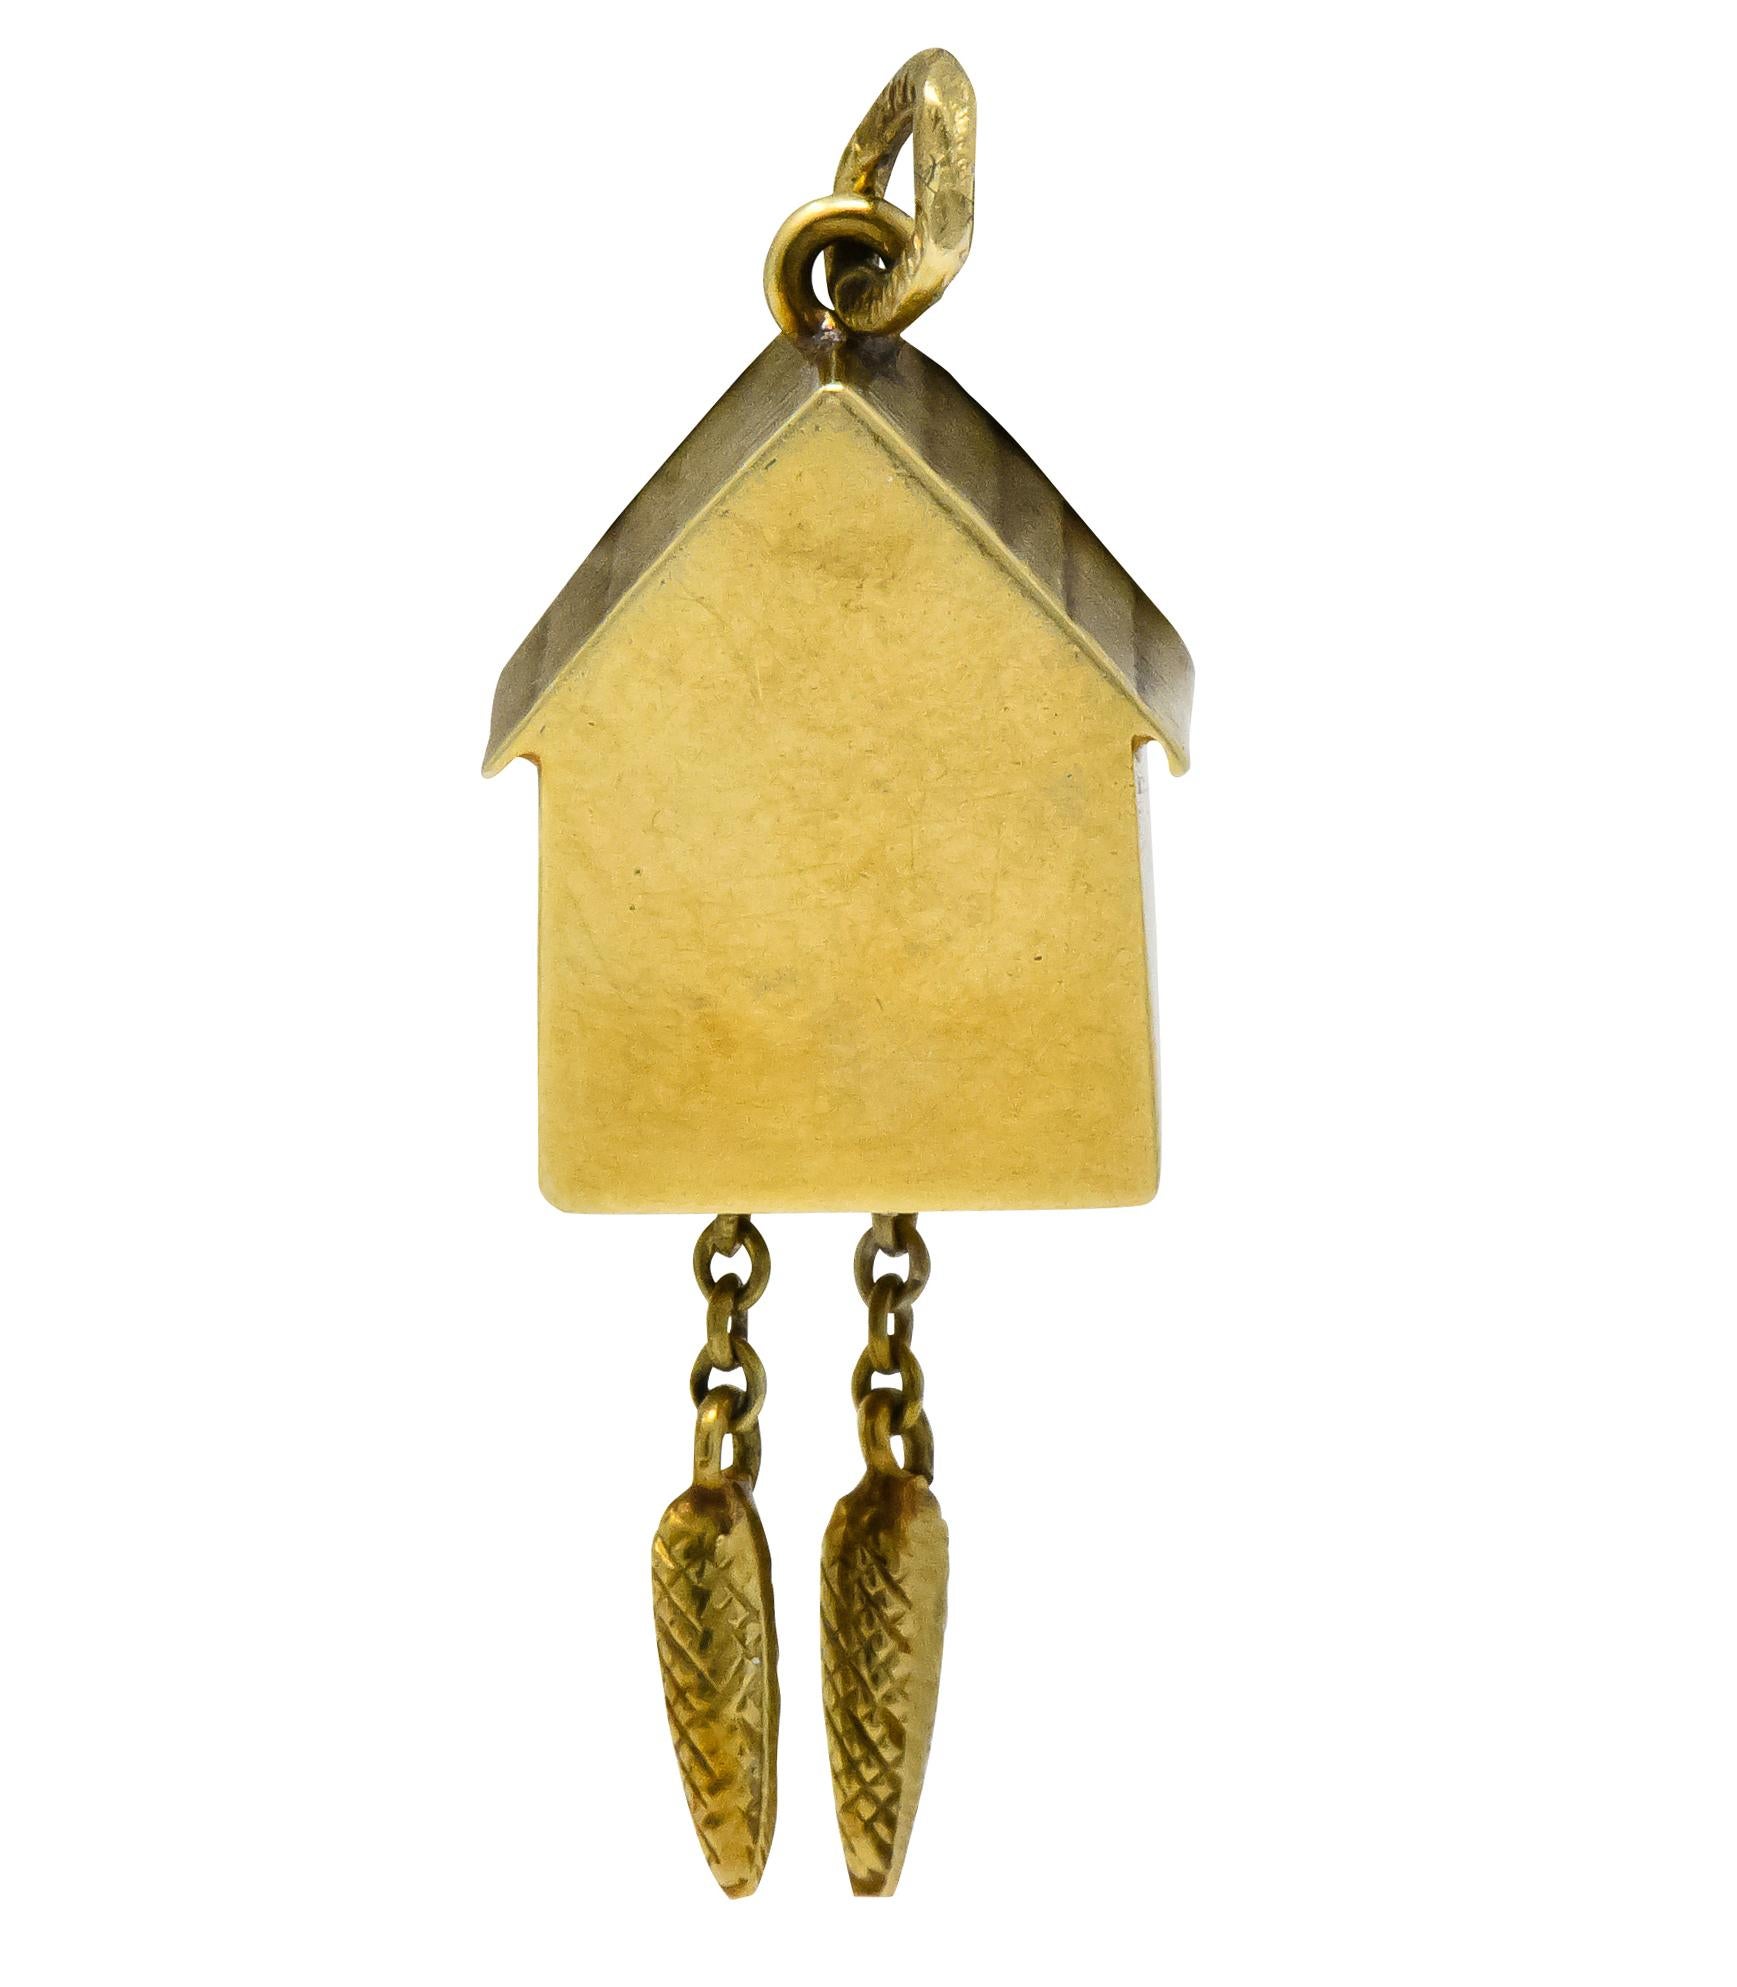 Designed as a cuckoo clock with open window for peeking bird when hanging weights are tugged

Remnant of green enamel on window shutter, loss consistent with age, wear, and use

Stamped 14k and Germany

Circa 1905

Measures: 1 x 1/2 inch

Total